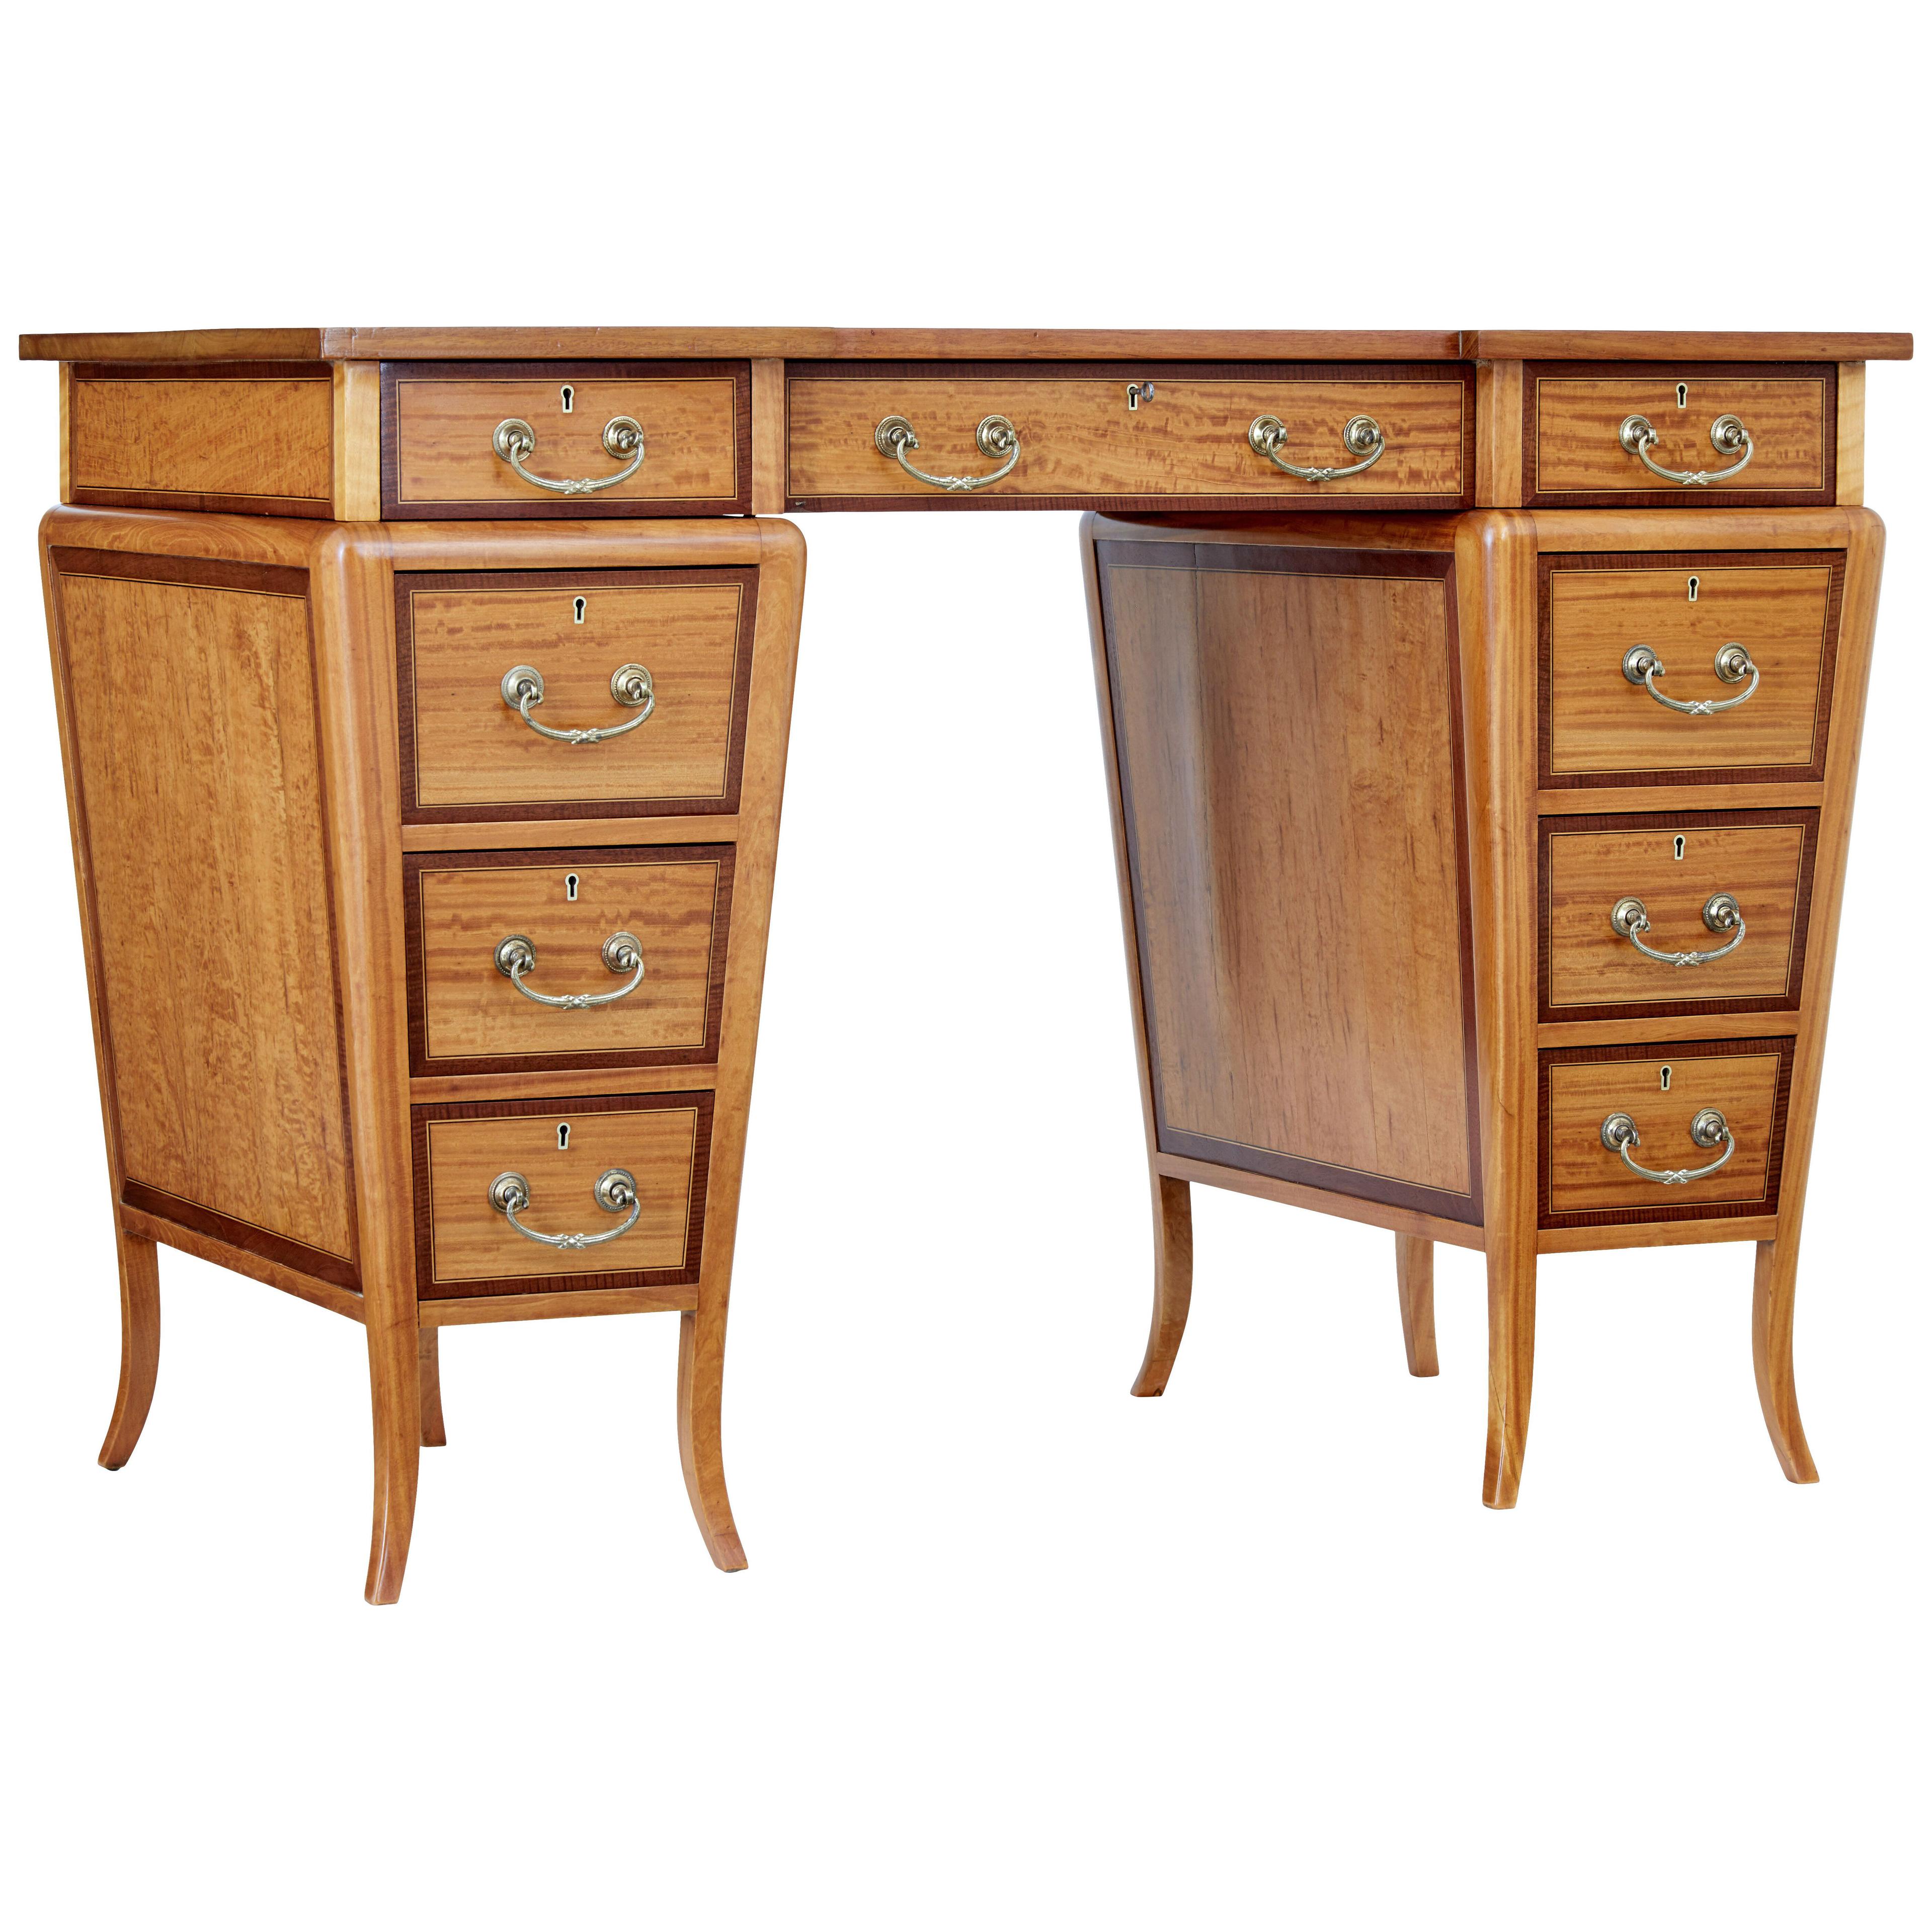 EARLY 20TH CENTURY SATINWOOD SHERATON REVIVAL DESK